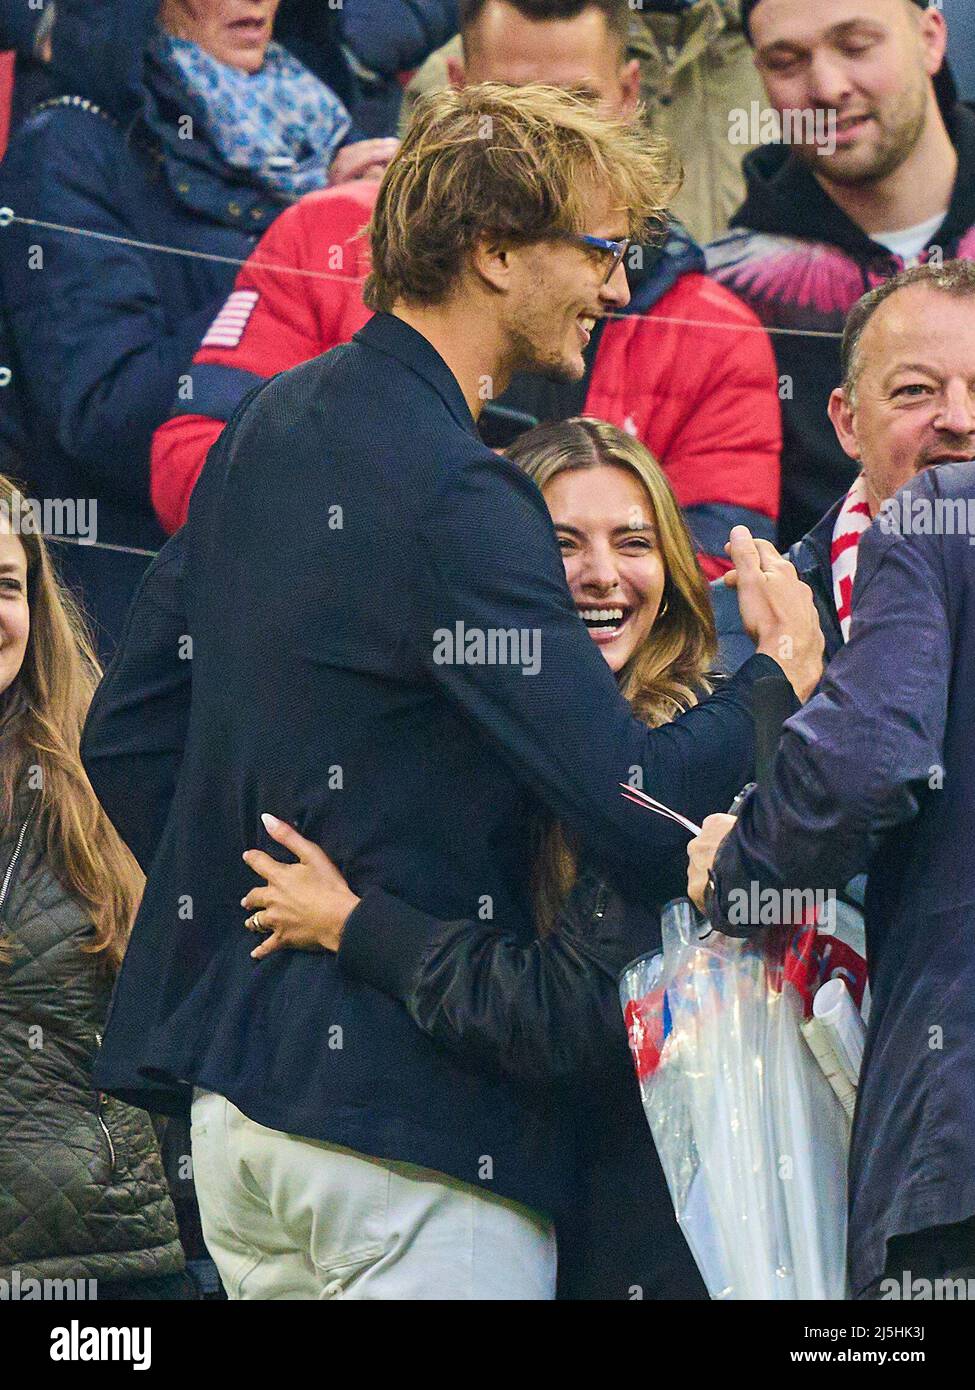 Tennis professional Sascha Zverev with girlfriend Sophia Thomalla in the match FC BAYERN MÜNCHEN - BORUSSIA DORTMUND 1.German Football League on April 23, 2022 in Munich, Germany. Season 2021/2022, match day 31, 1.Bundesliga, München, 31.Spieltag. FCB, BVB © Peter Schatz / Alamy Live News    - DFL REGULATIONS PROHIBIT ANY USE OF PHOTOGRAPHS as IMAGE SEQUENCES and/or QUASI-VIDEO - Stock Photo